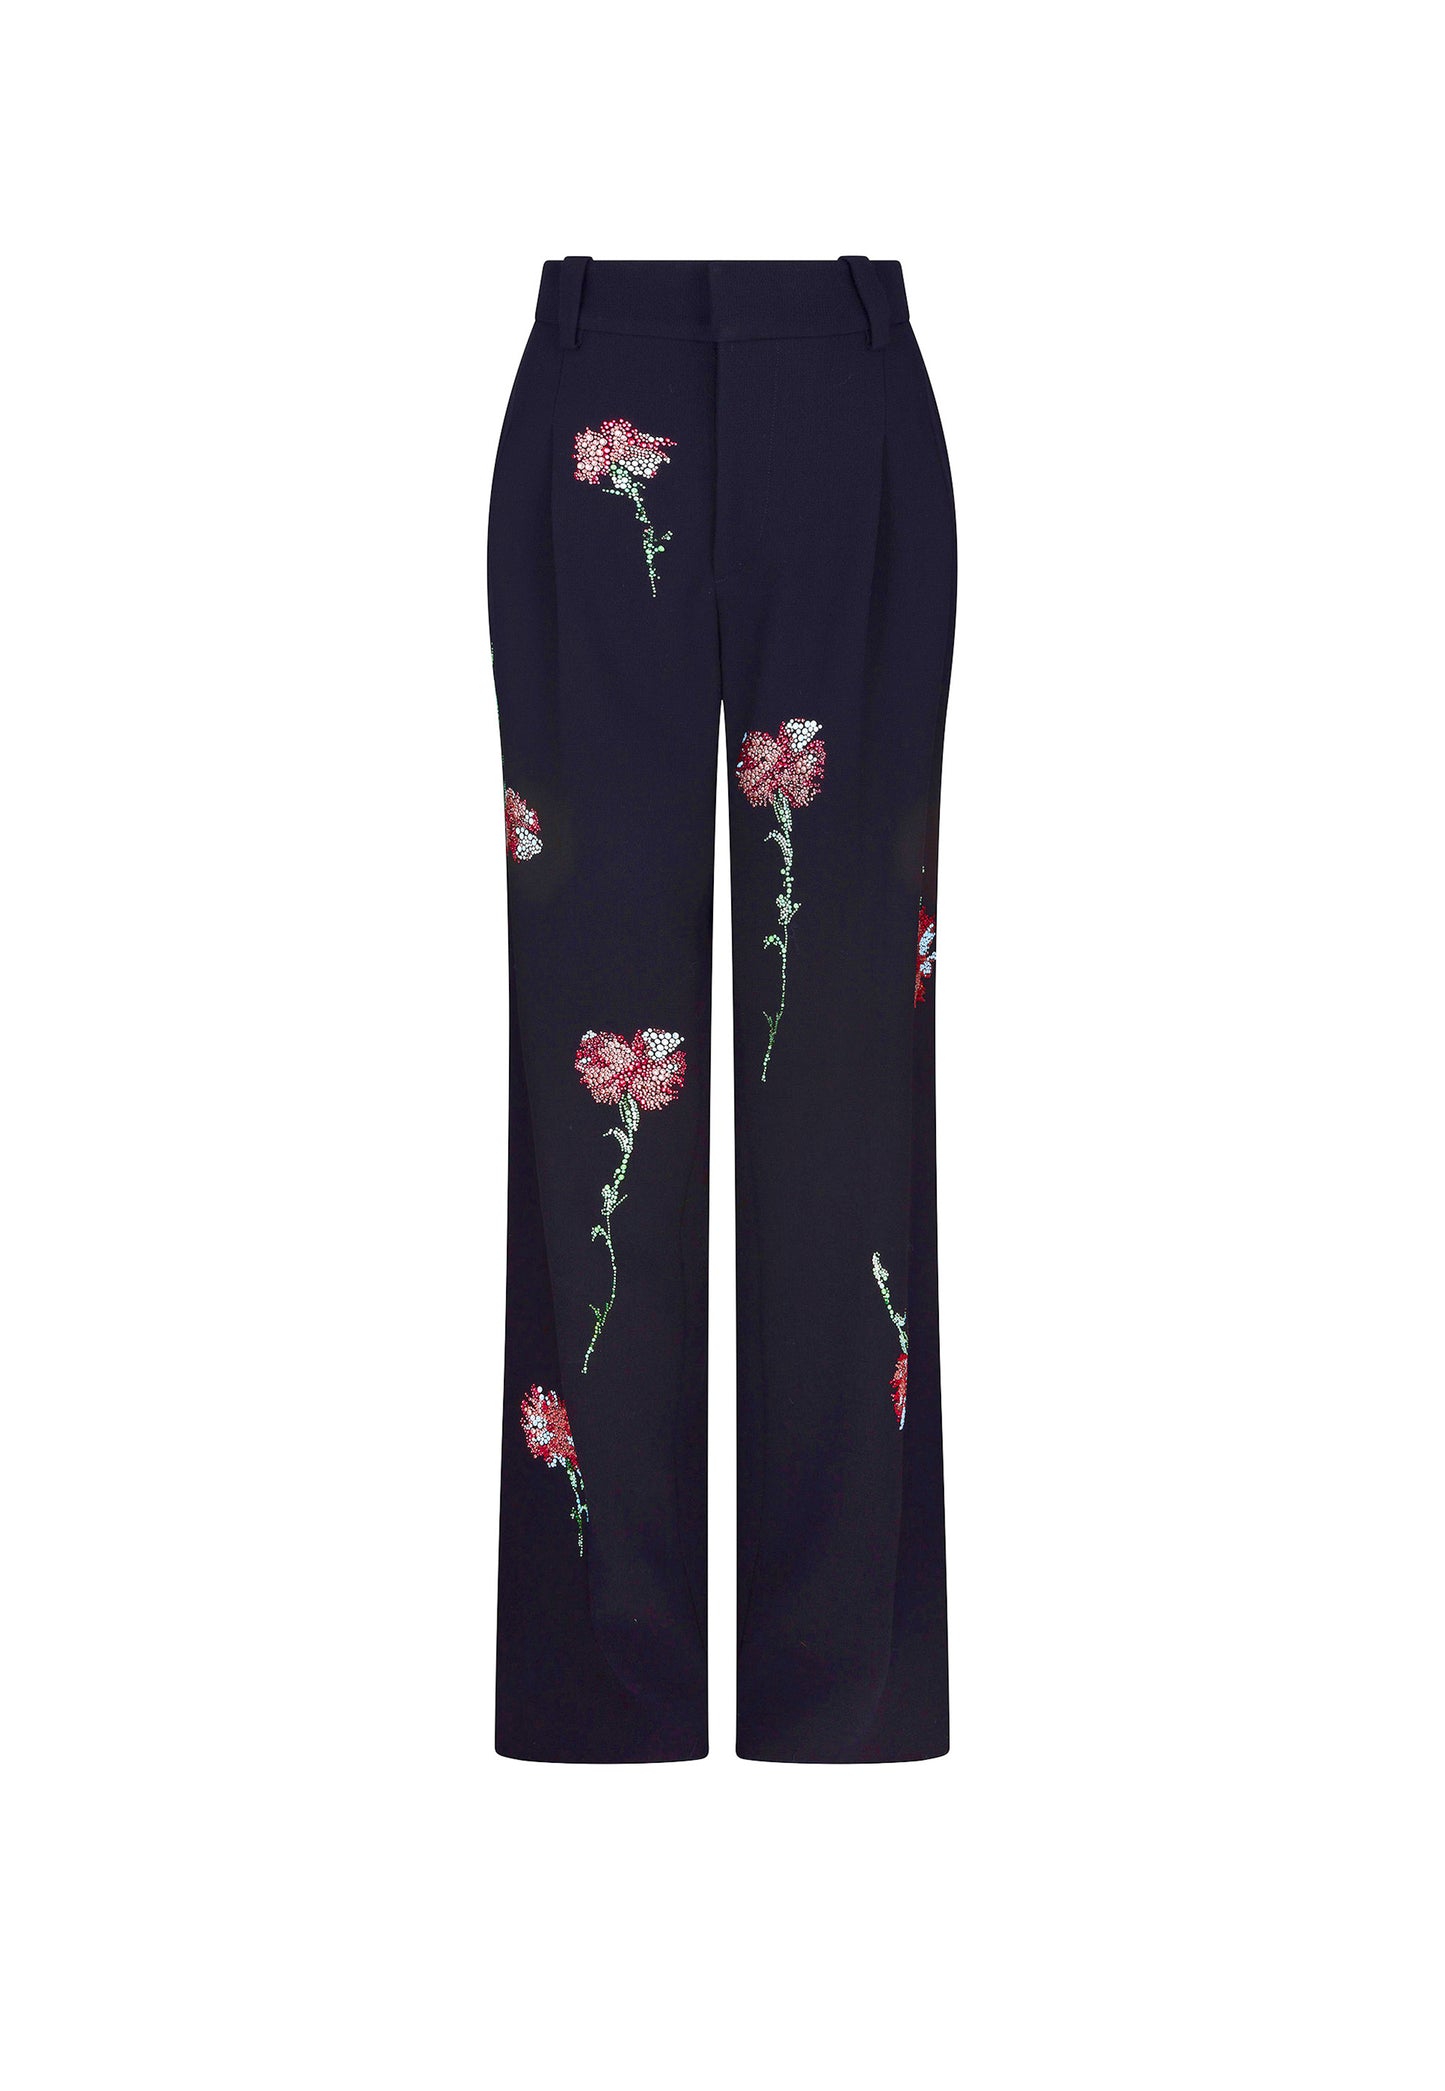 'CECIL BEATON PINK CARNATION' CRYSTAL BAGGY TROUSERS -  - Libertine